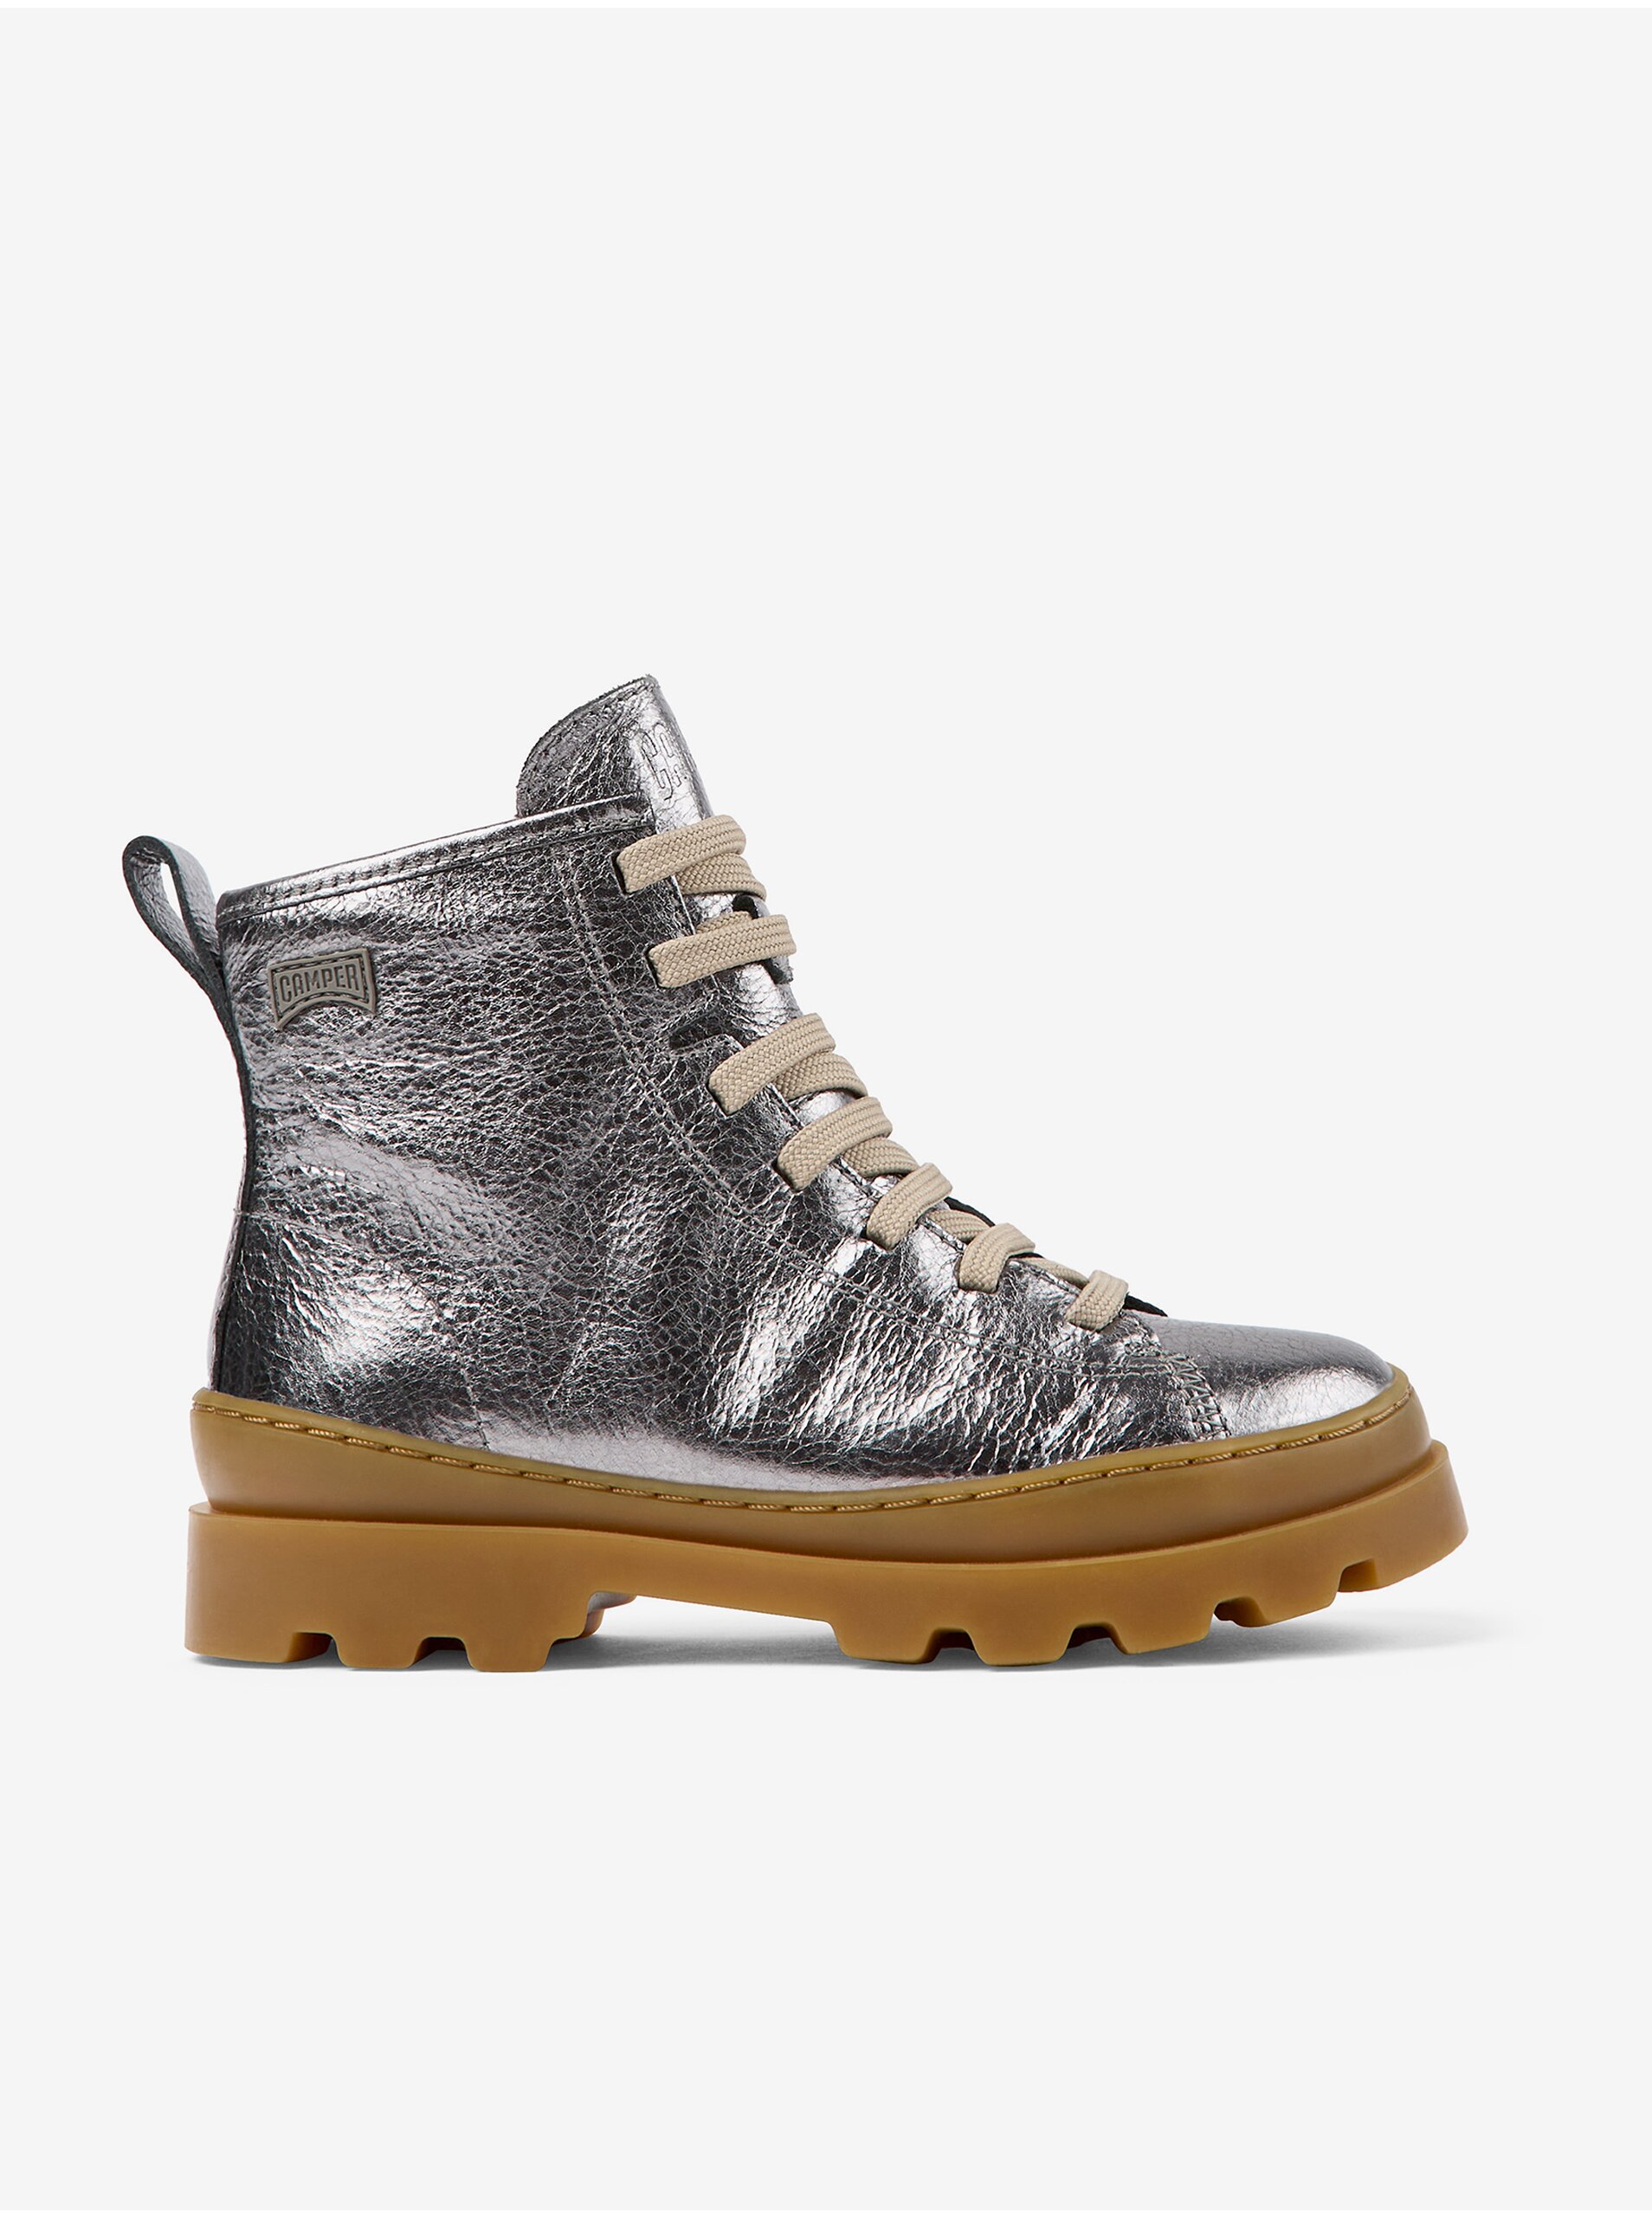 Girls' Leather Winter Boots in Silver Color Camper Brutus - Girls